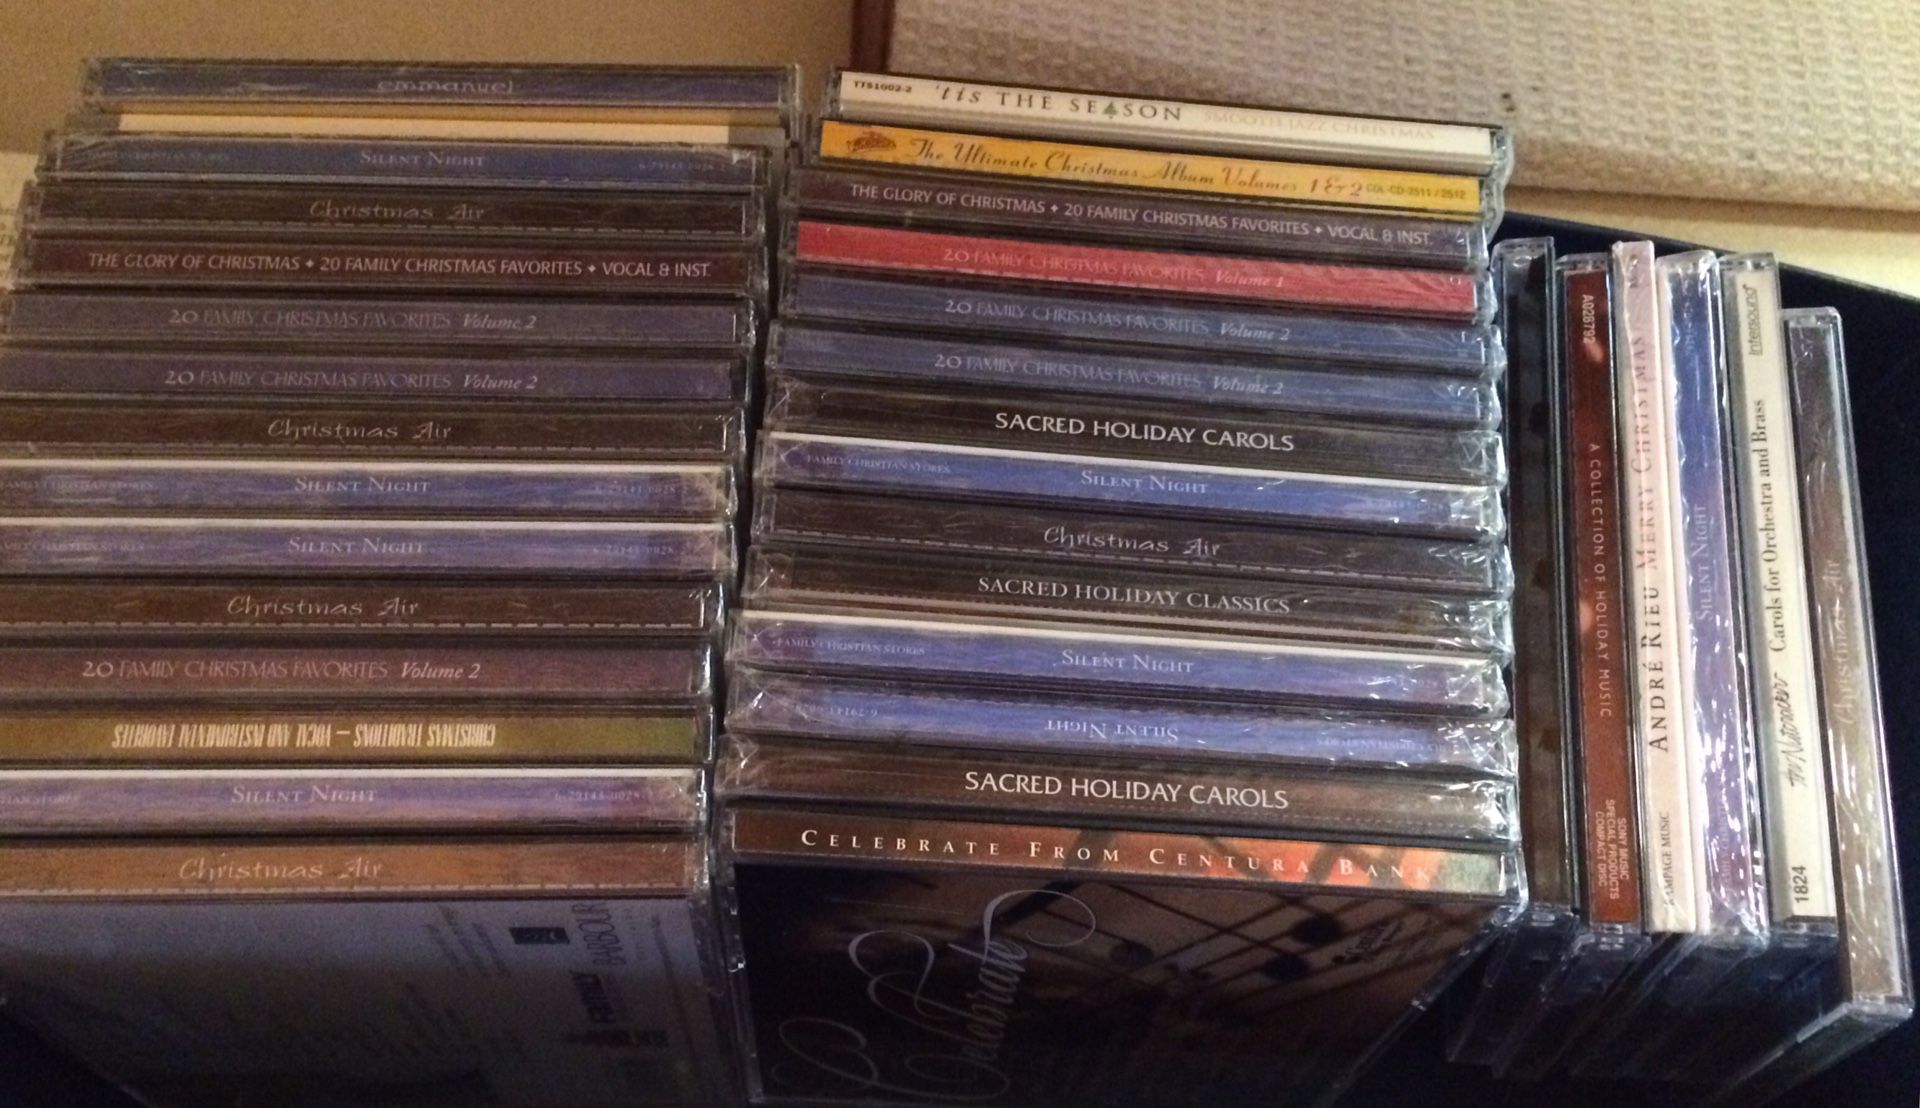 Christmas CD’s, classical music & oldies, DVD